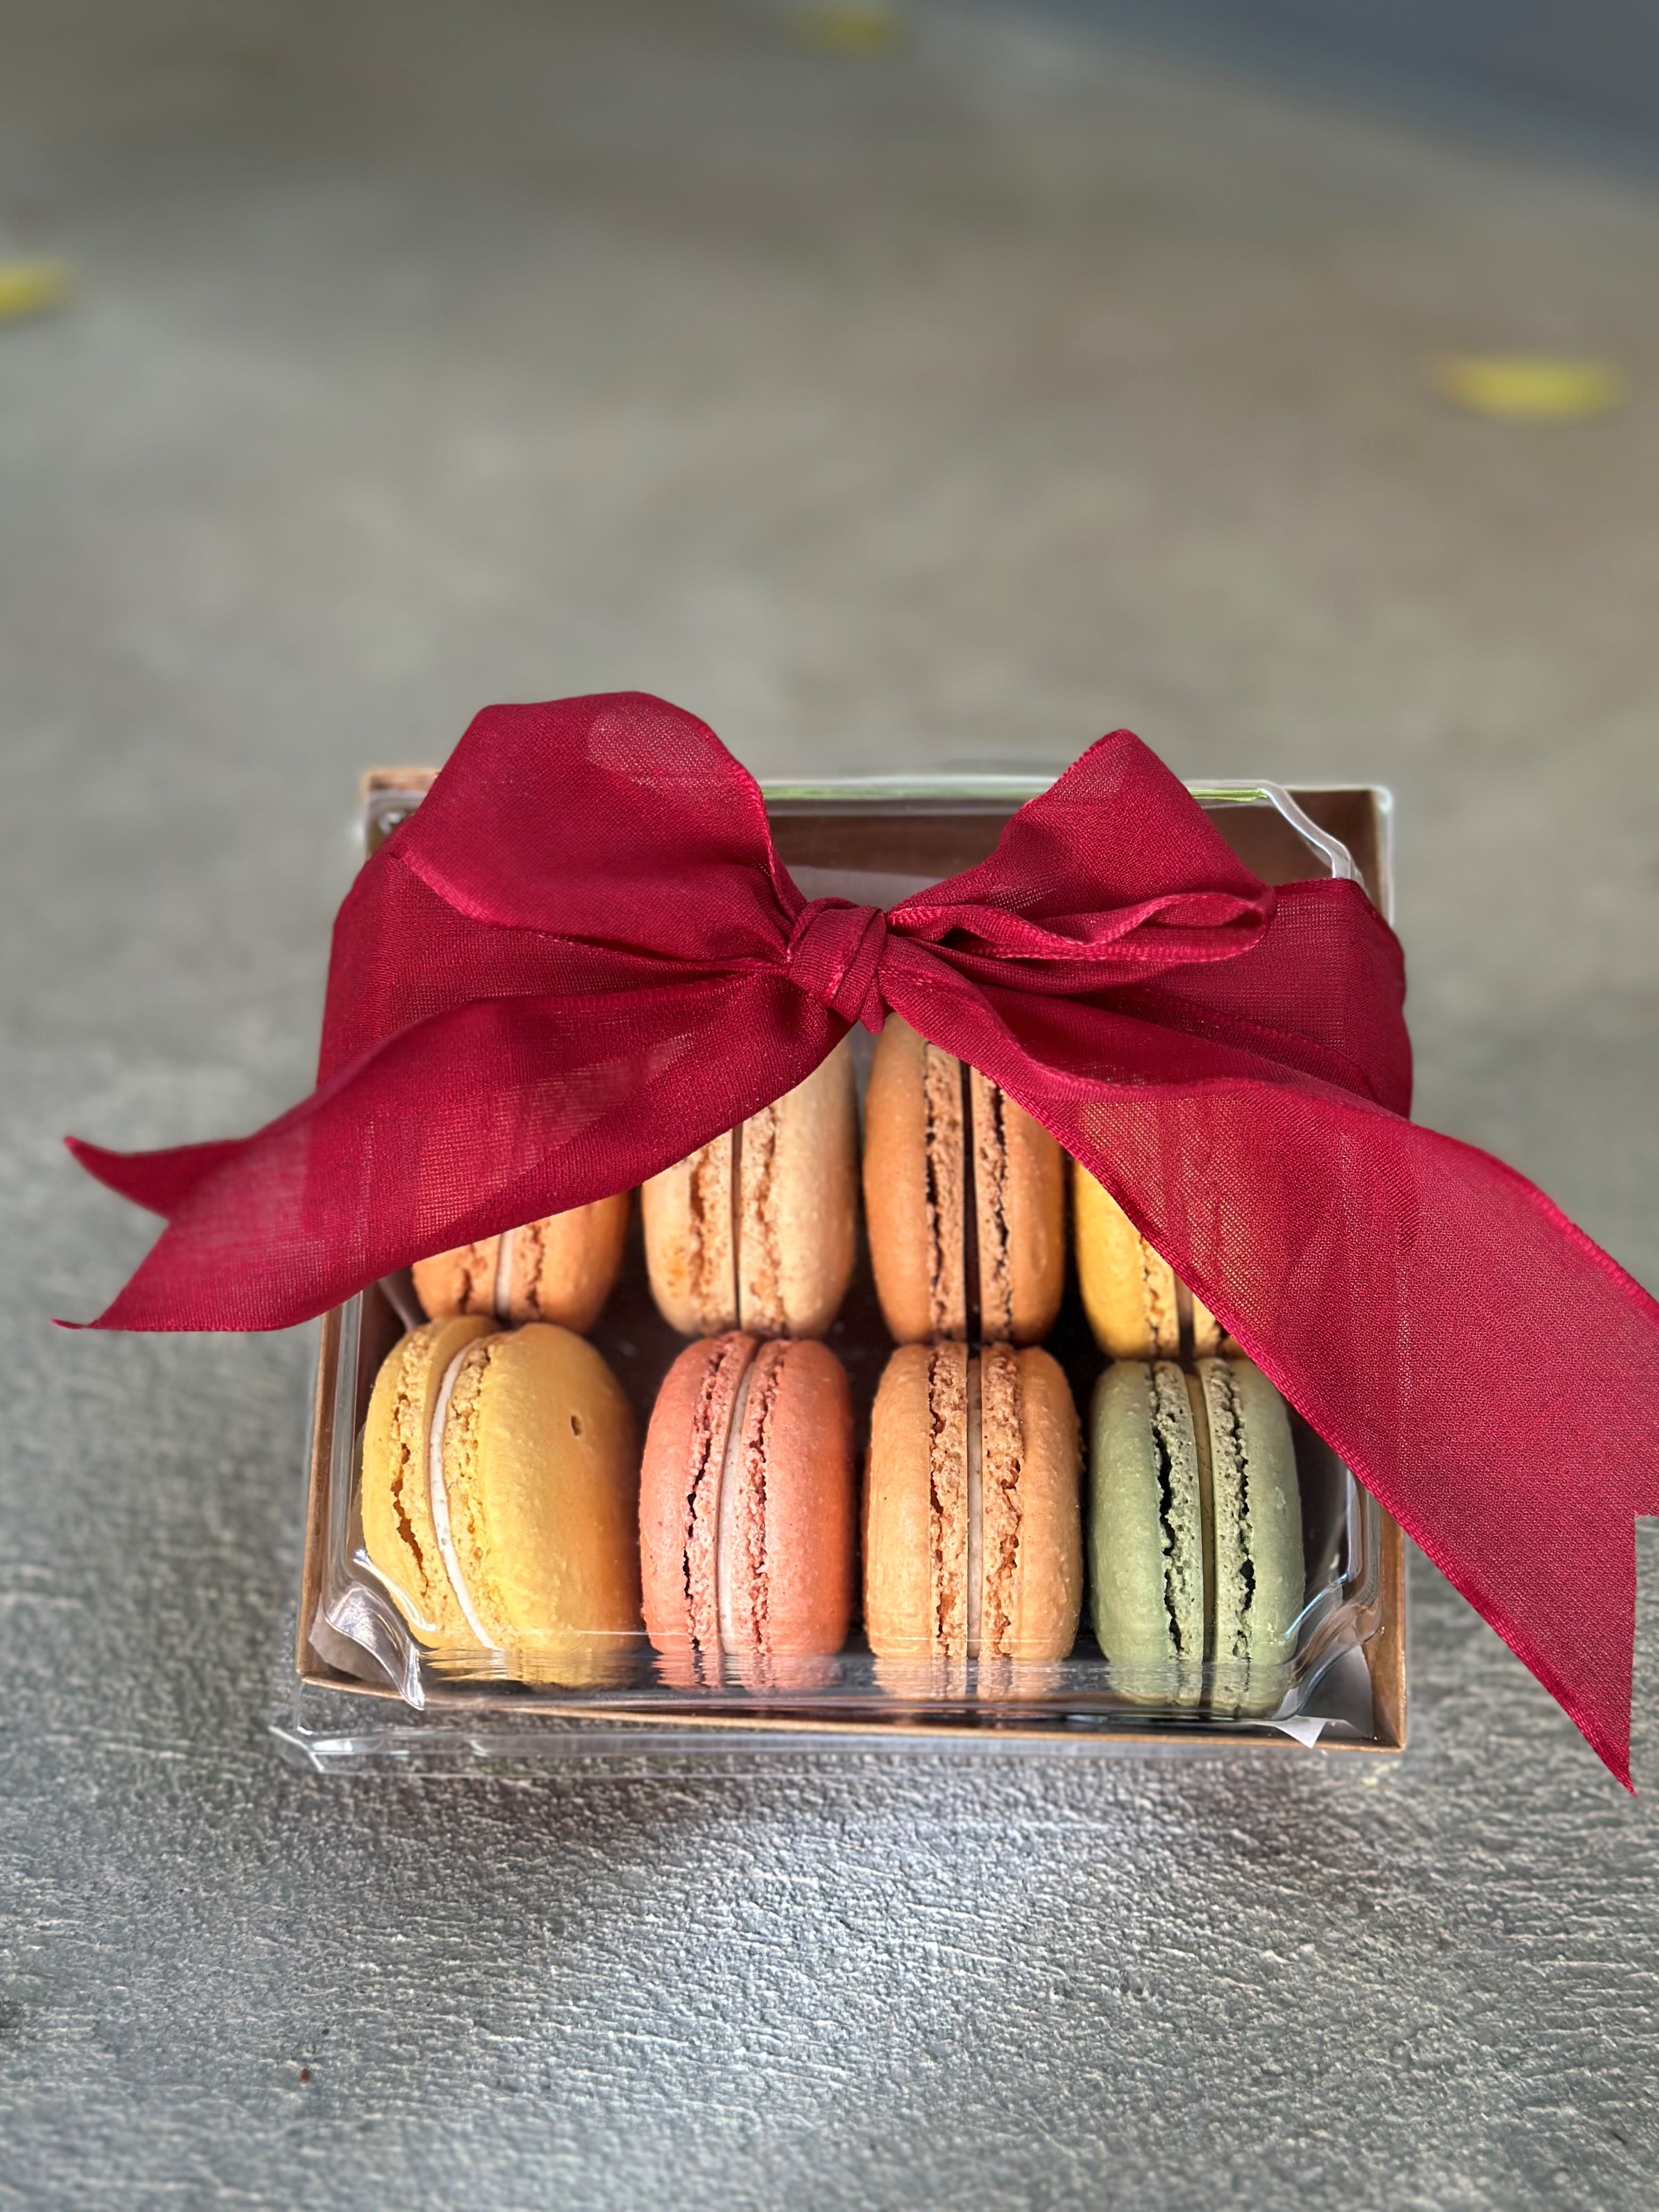 Macarons /  6 French style macrons your choice of filling - Parisian-style cookie filled with a ganache, buttercream or jam.